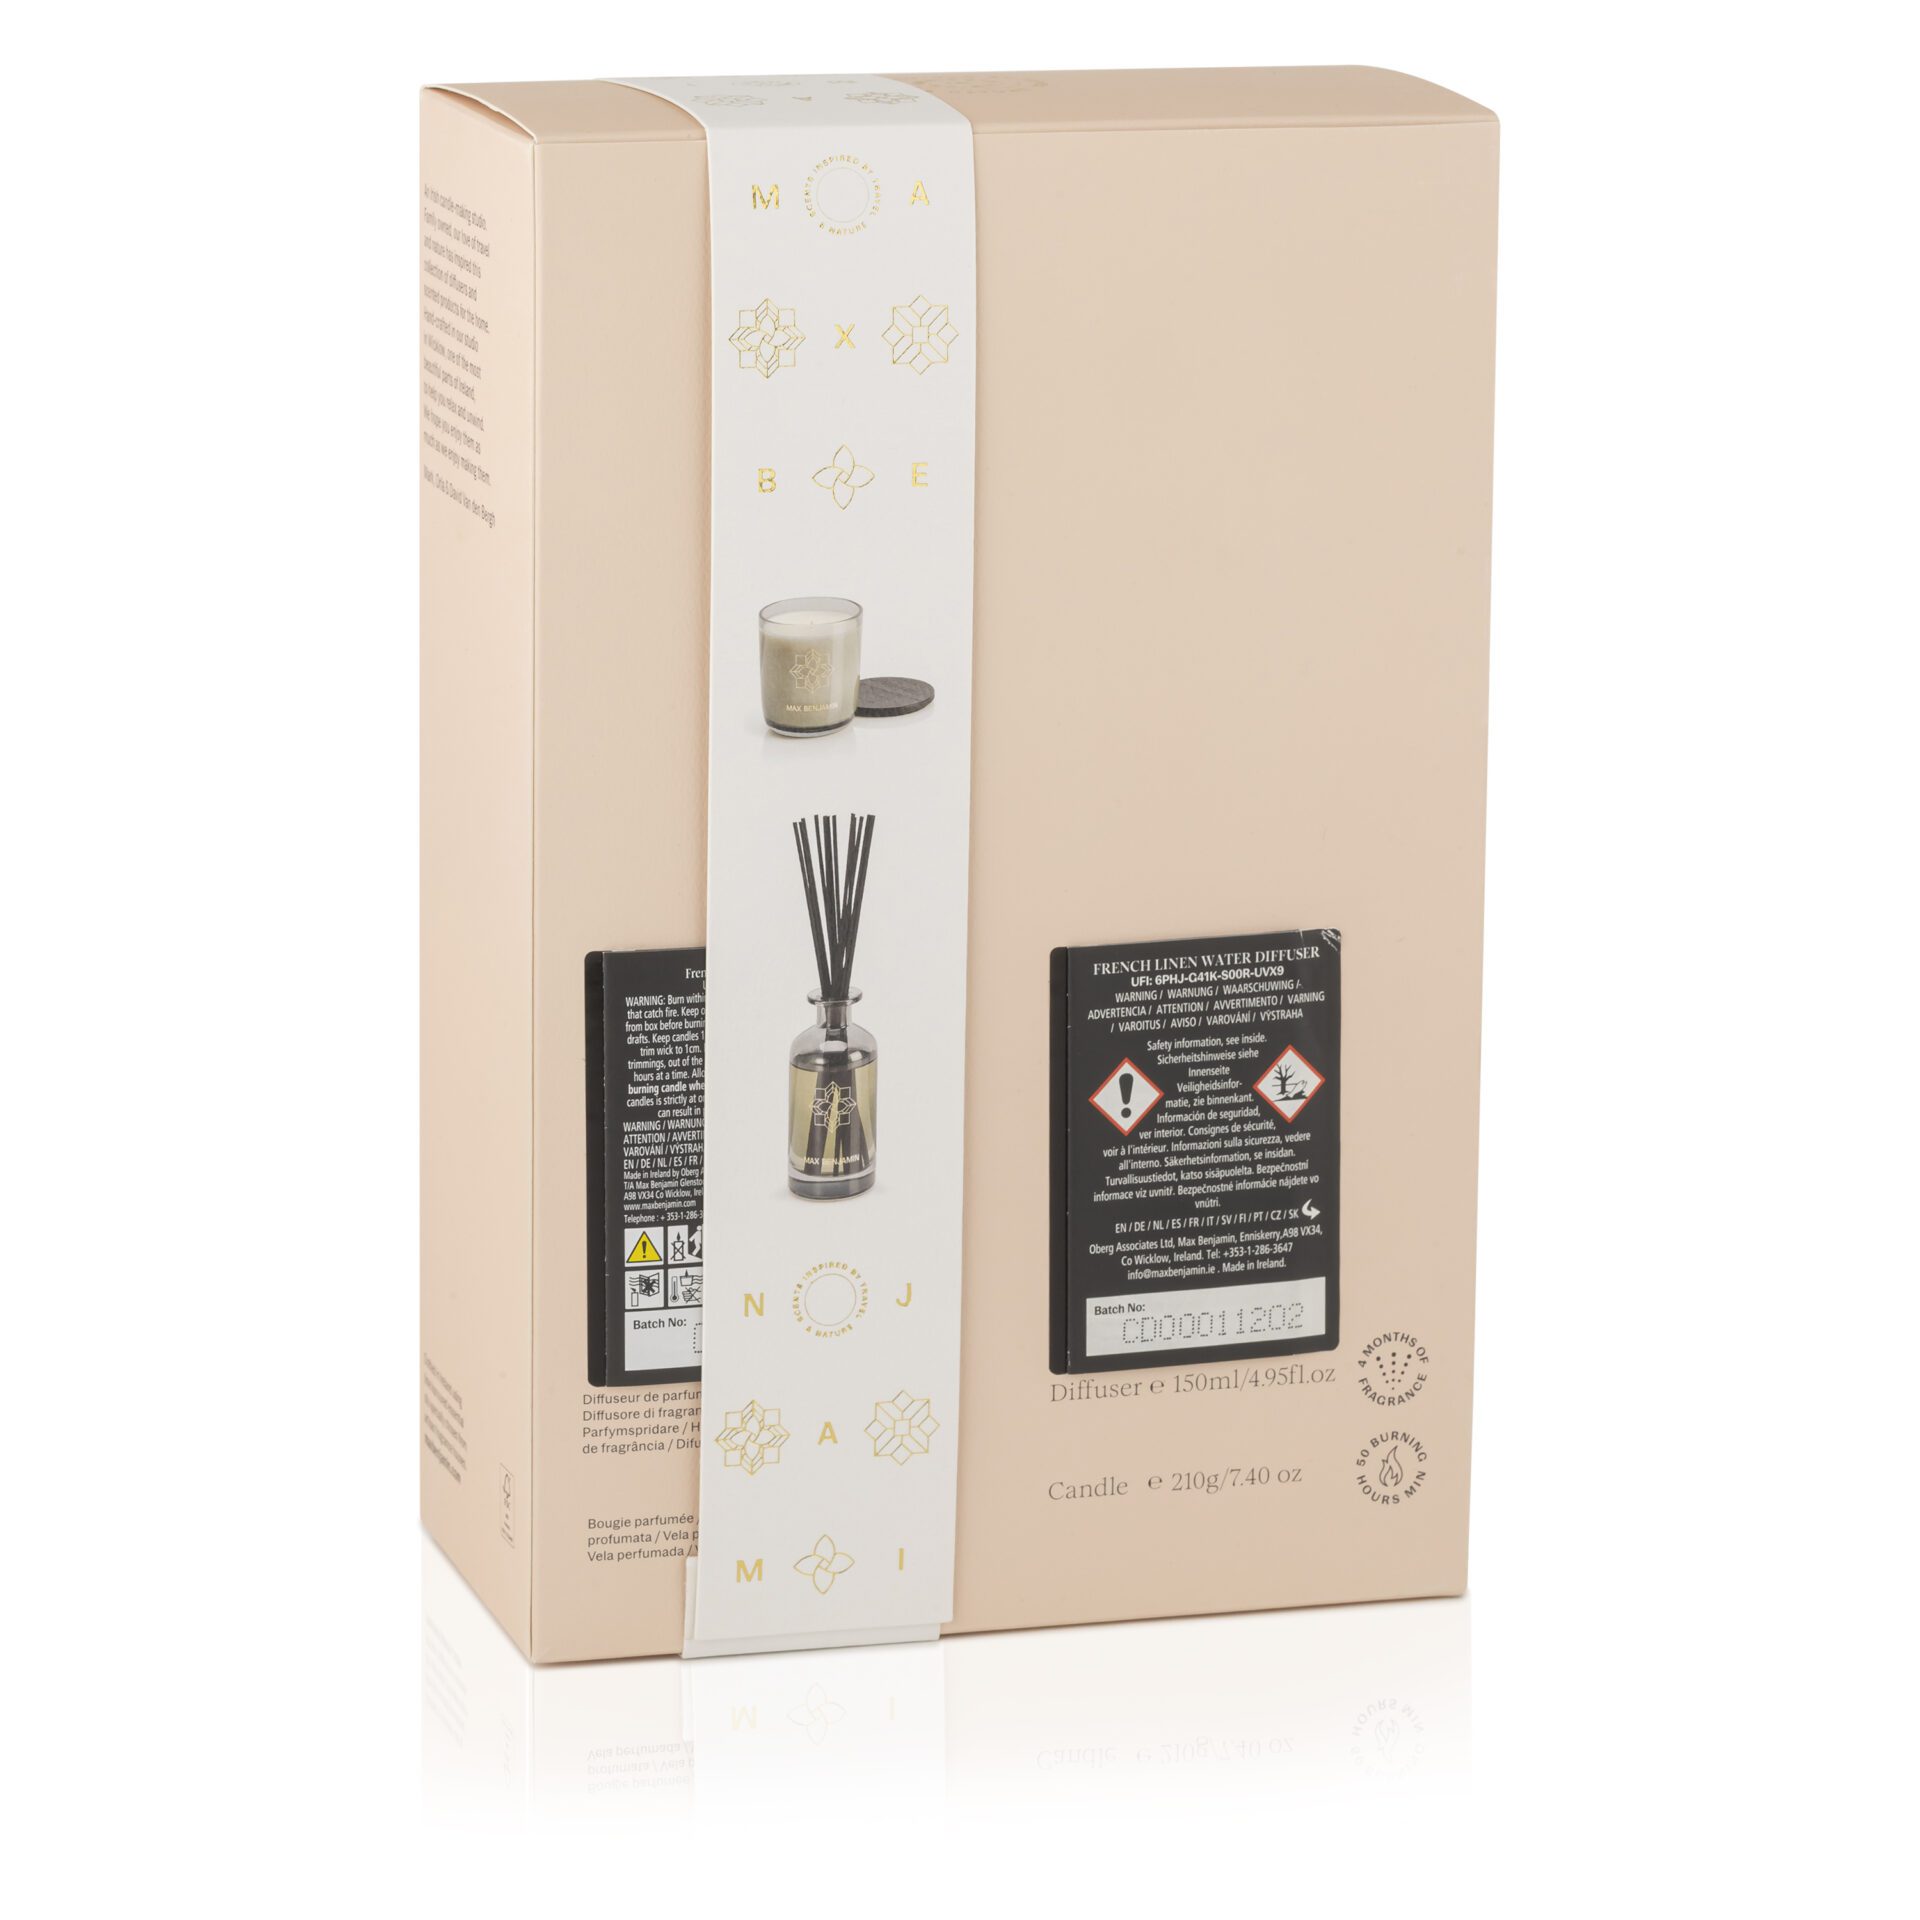 Candle & Diffuser Gift Set - French Linen Water - Max Benjamin